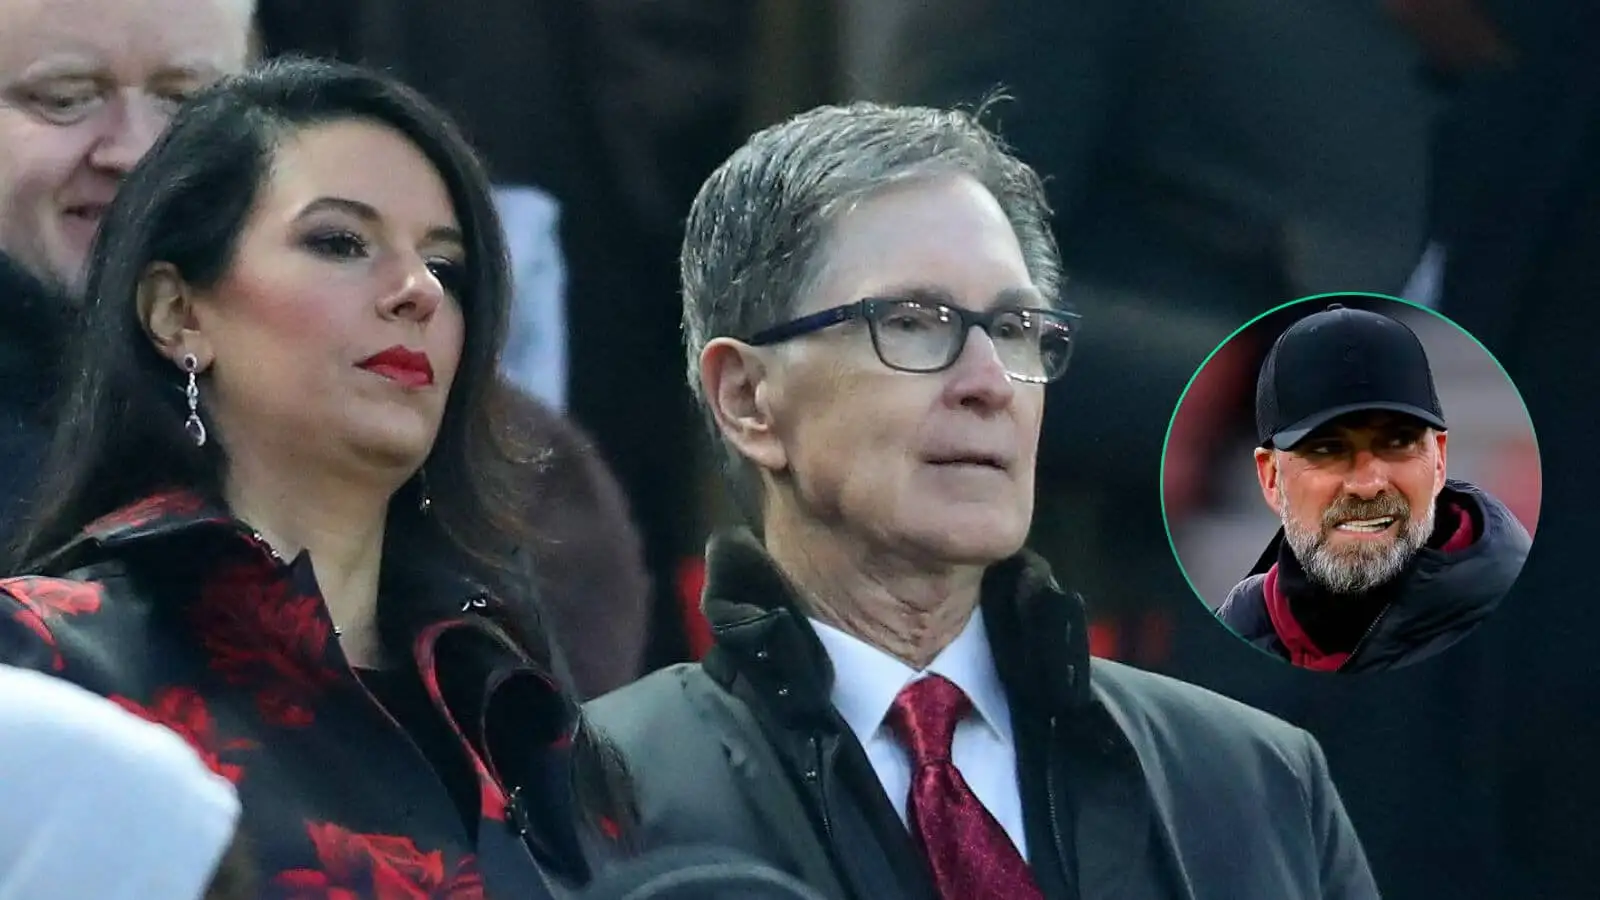 Linda Pizutti and John Henry are owners of Liverpool and are seeking a successor to Jurgen Klopp as manager